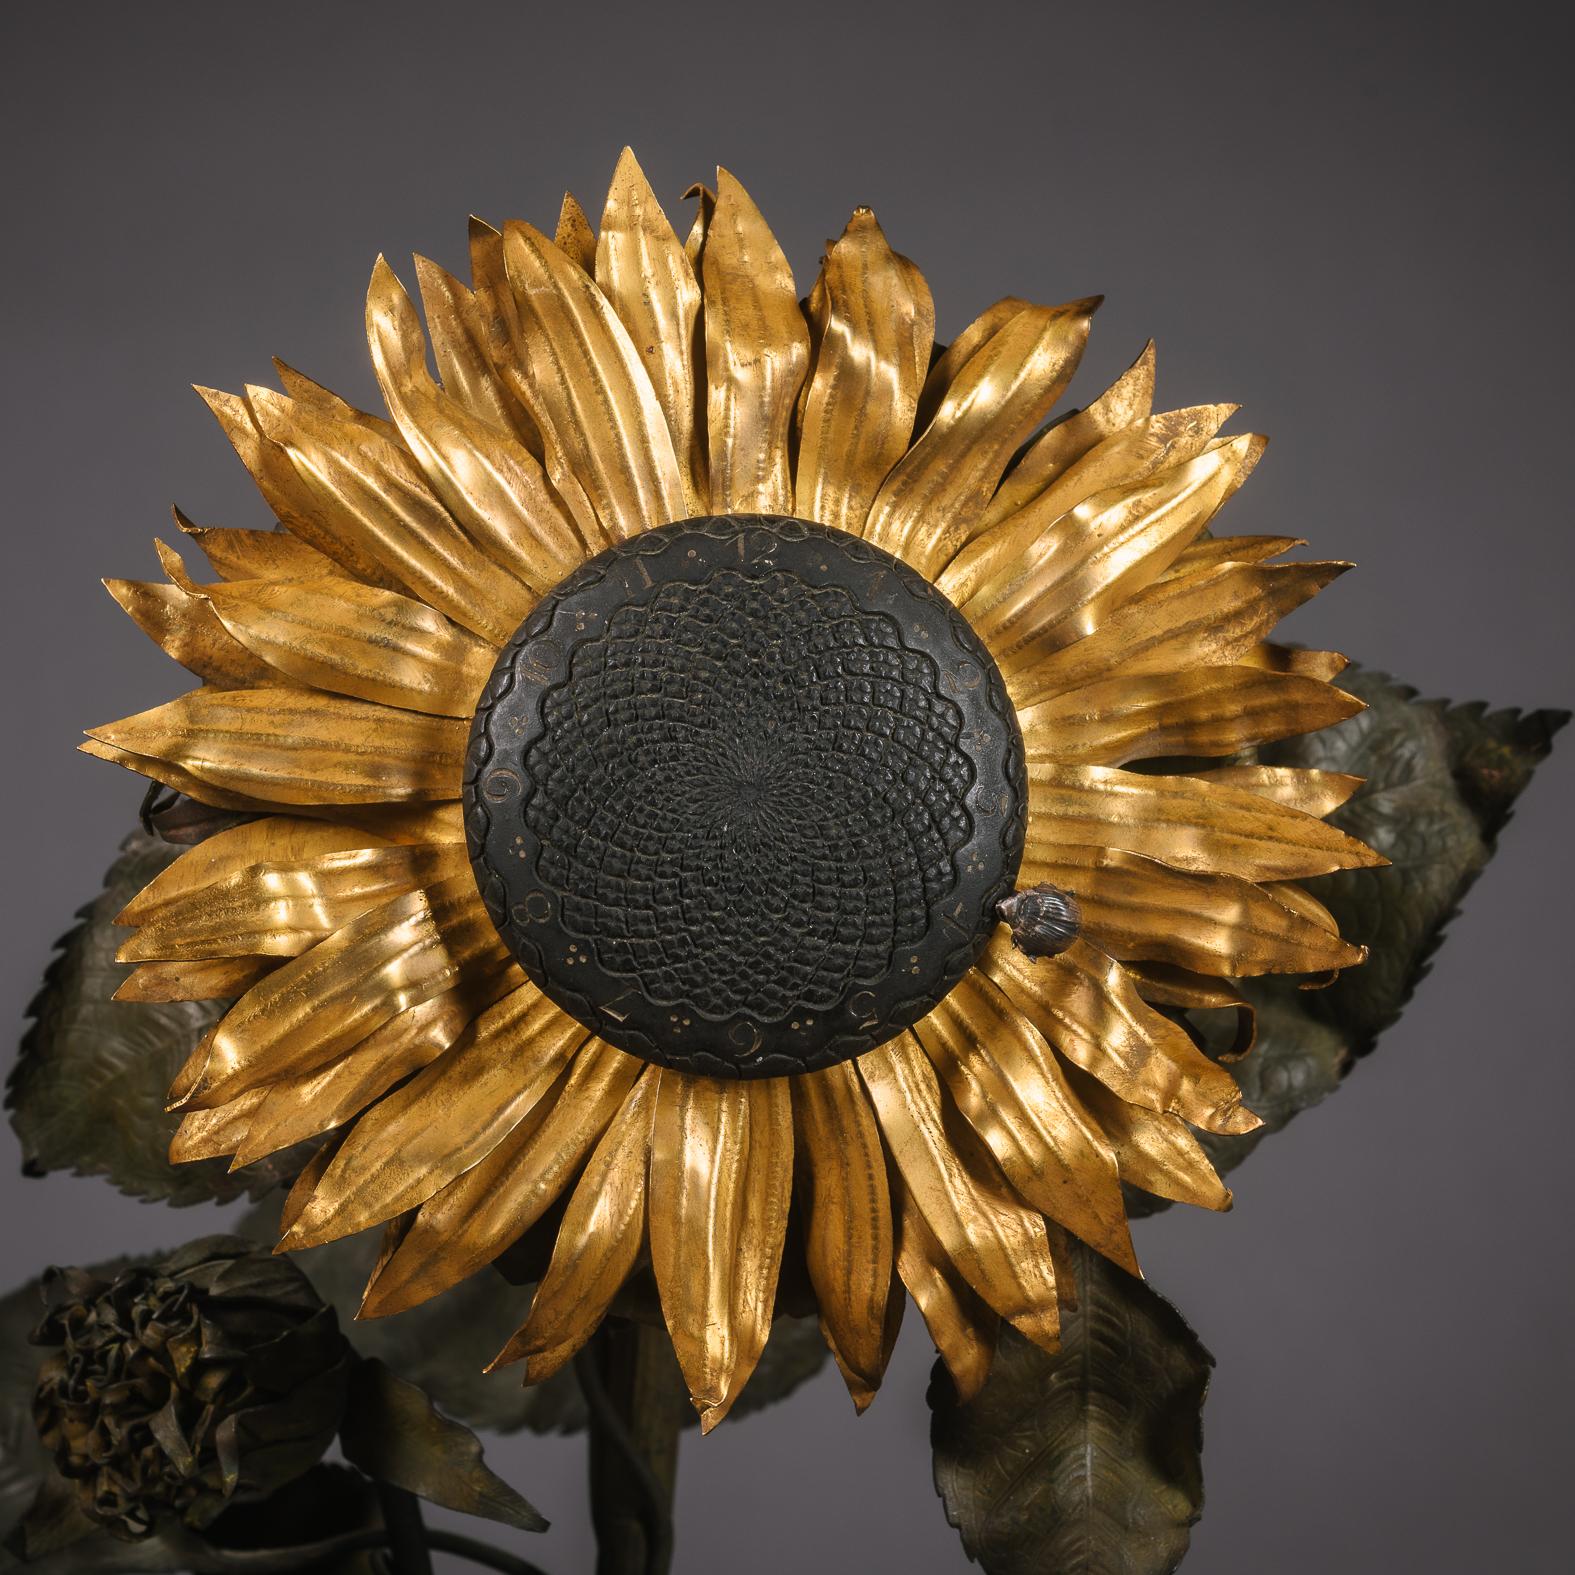 'Pendule Fleur d'Hélianthe' - A Rare 'Japonisme' Cut-Crystal Glass, Gilt and Patinated Bronze Clock by Baccarat, Paris.

Stamped 'Baccarat', The clock movement signed 'Planchon à Paris'.

The sunflower stem is suspended in an ovoid glass body